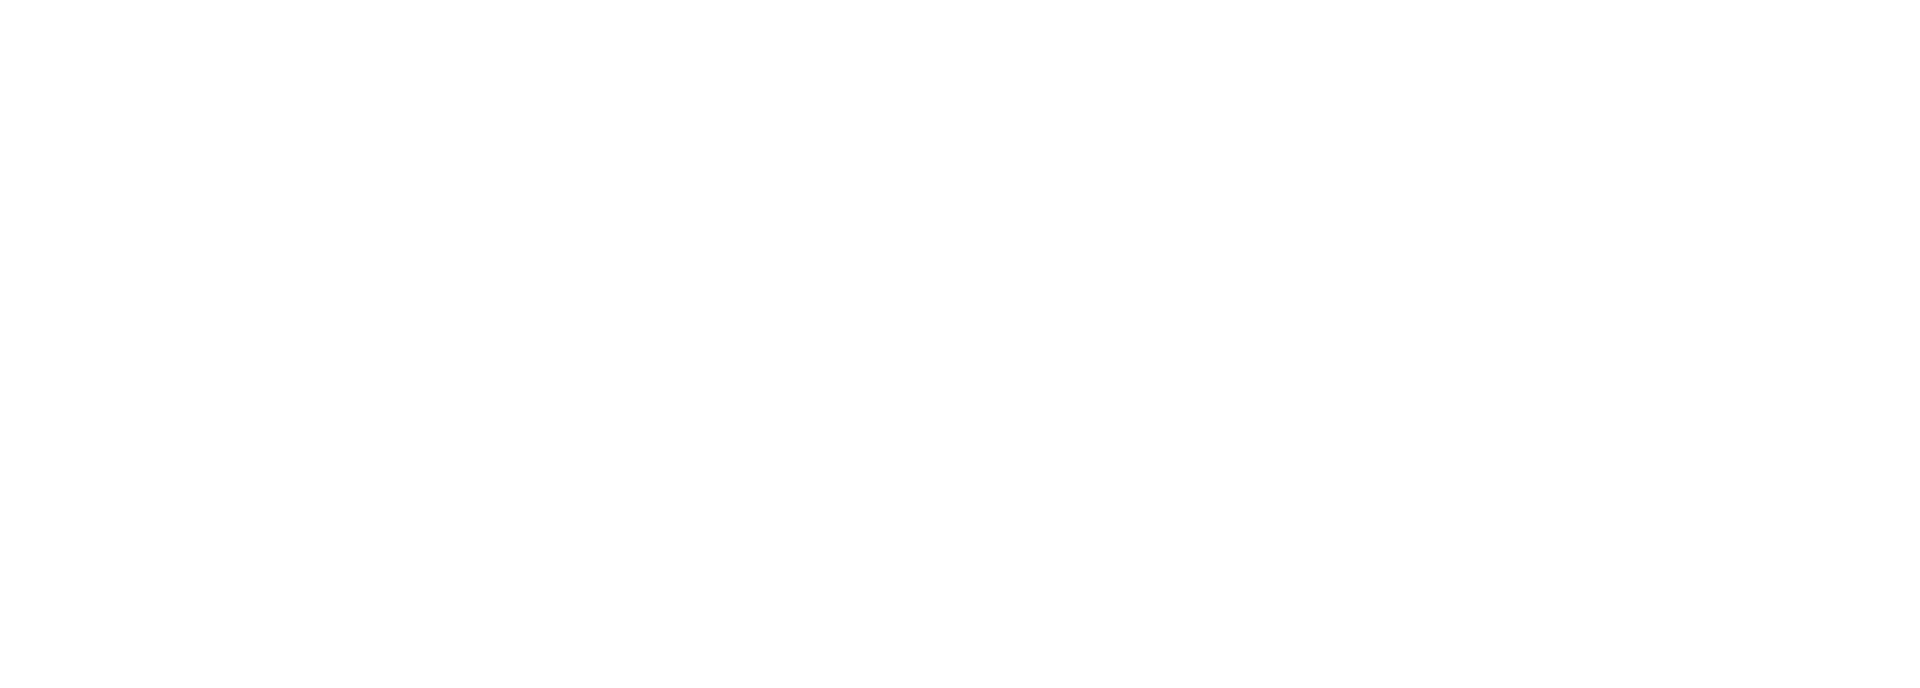 https://theherbary.com/wp-content/uploads/2021/12/The-Herbary-Logo-Final_White.png